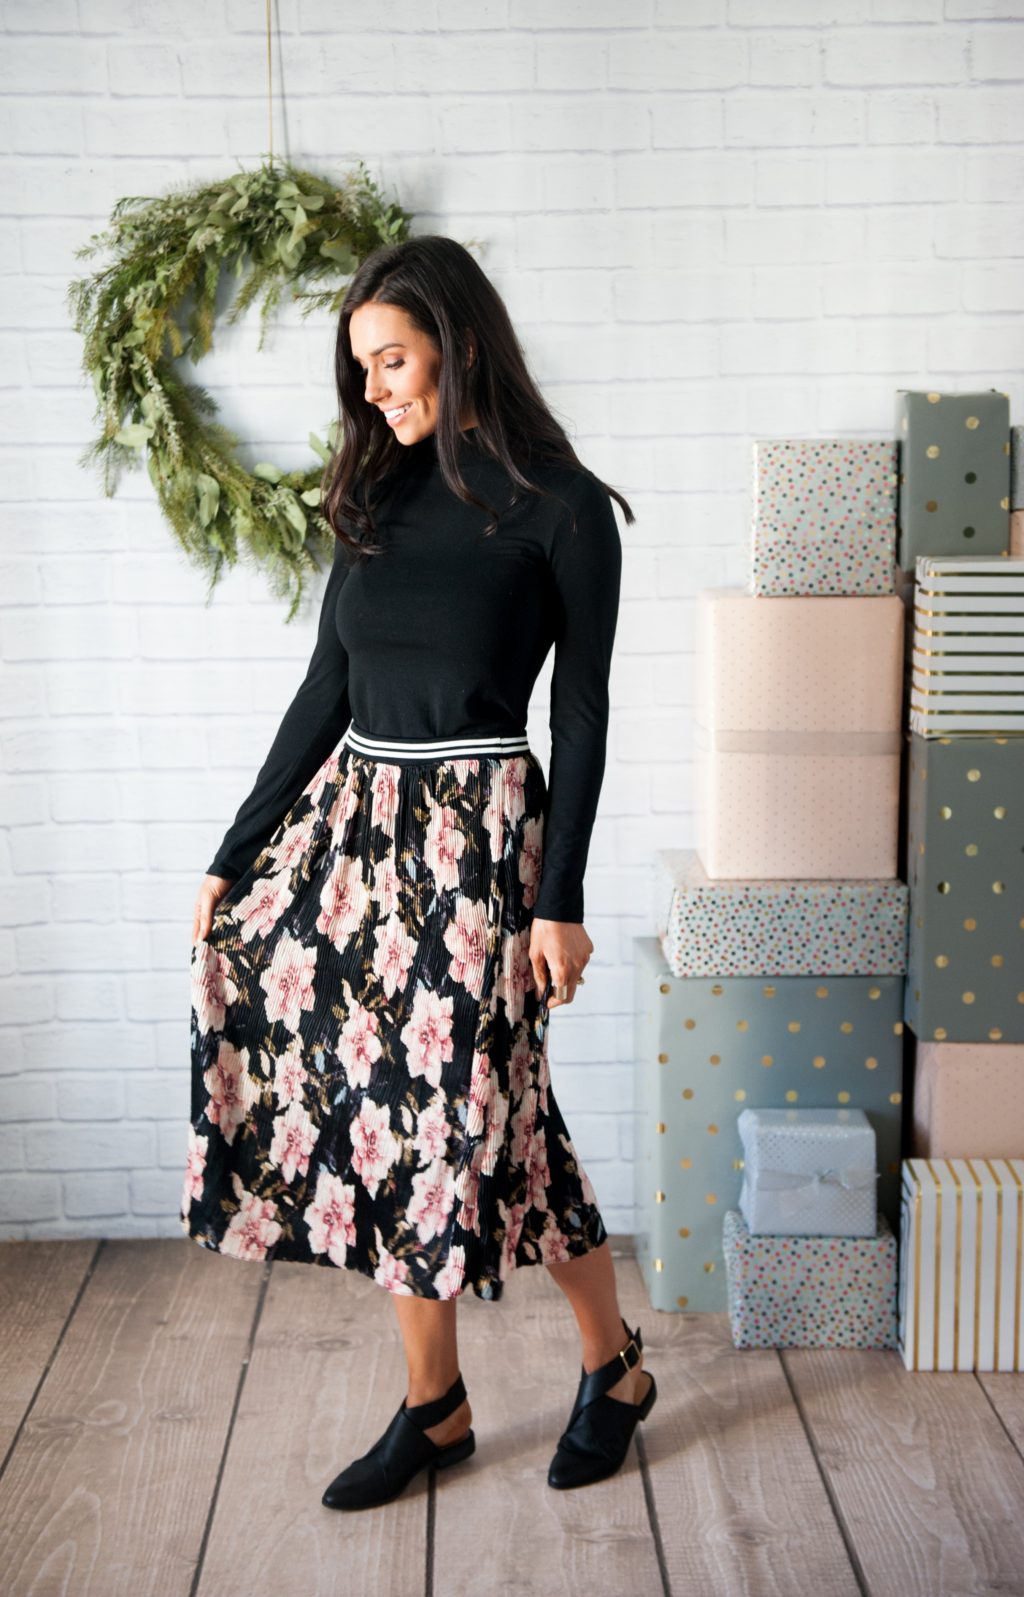 Midi Skirt And Turtleneck. 2 65+ Smartest Business Casual Attire for Women - 35